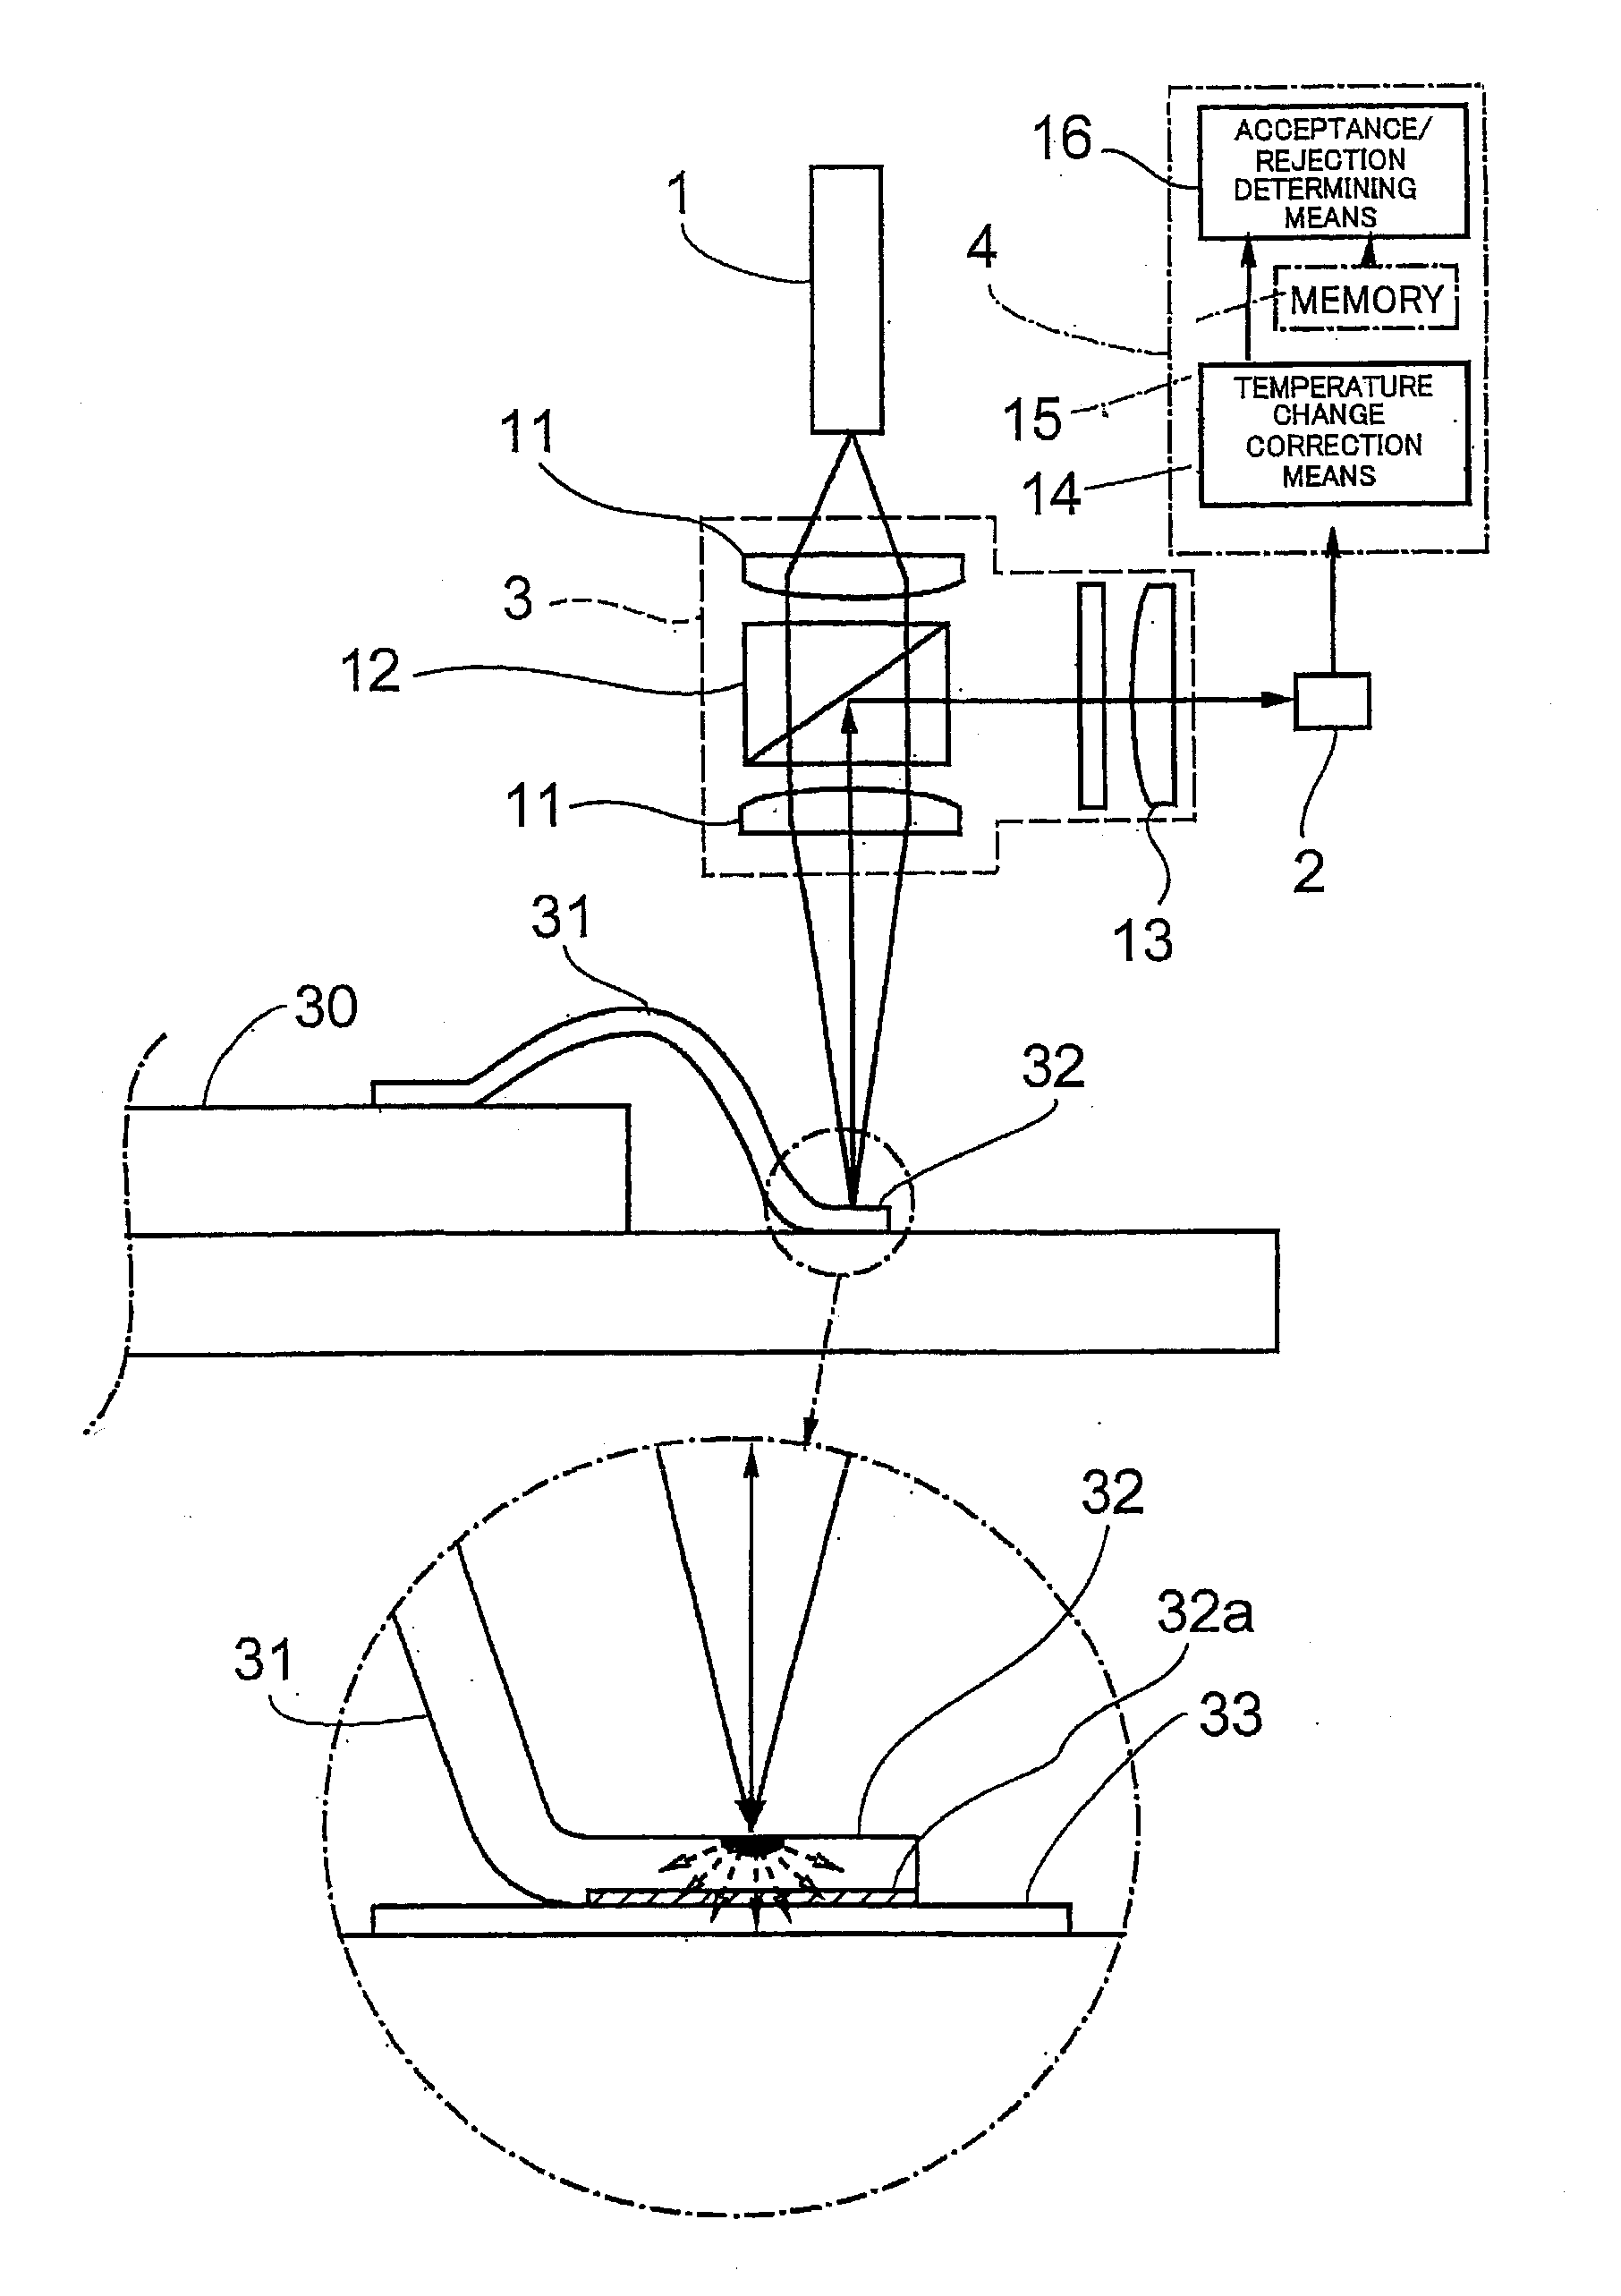 Method and apparatus for determining acceptance/rejection of fine diameter wire bonding